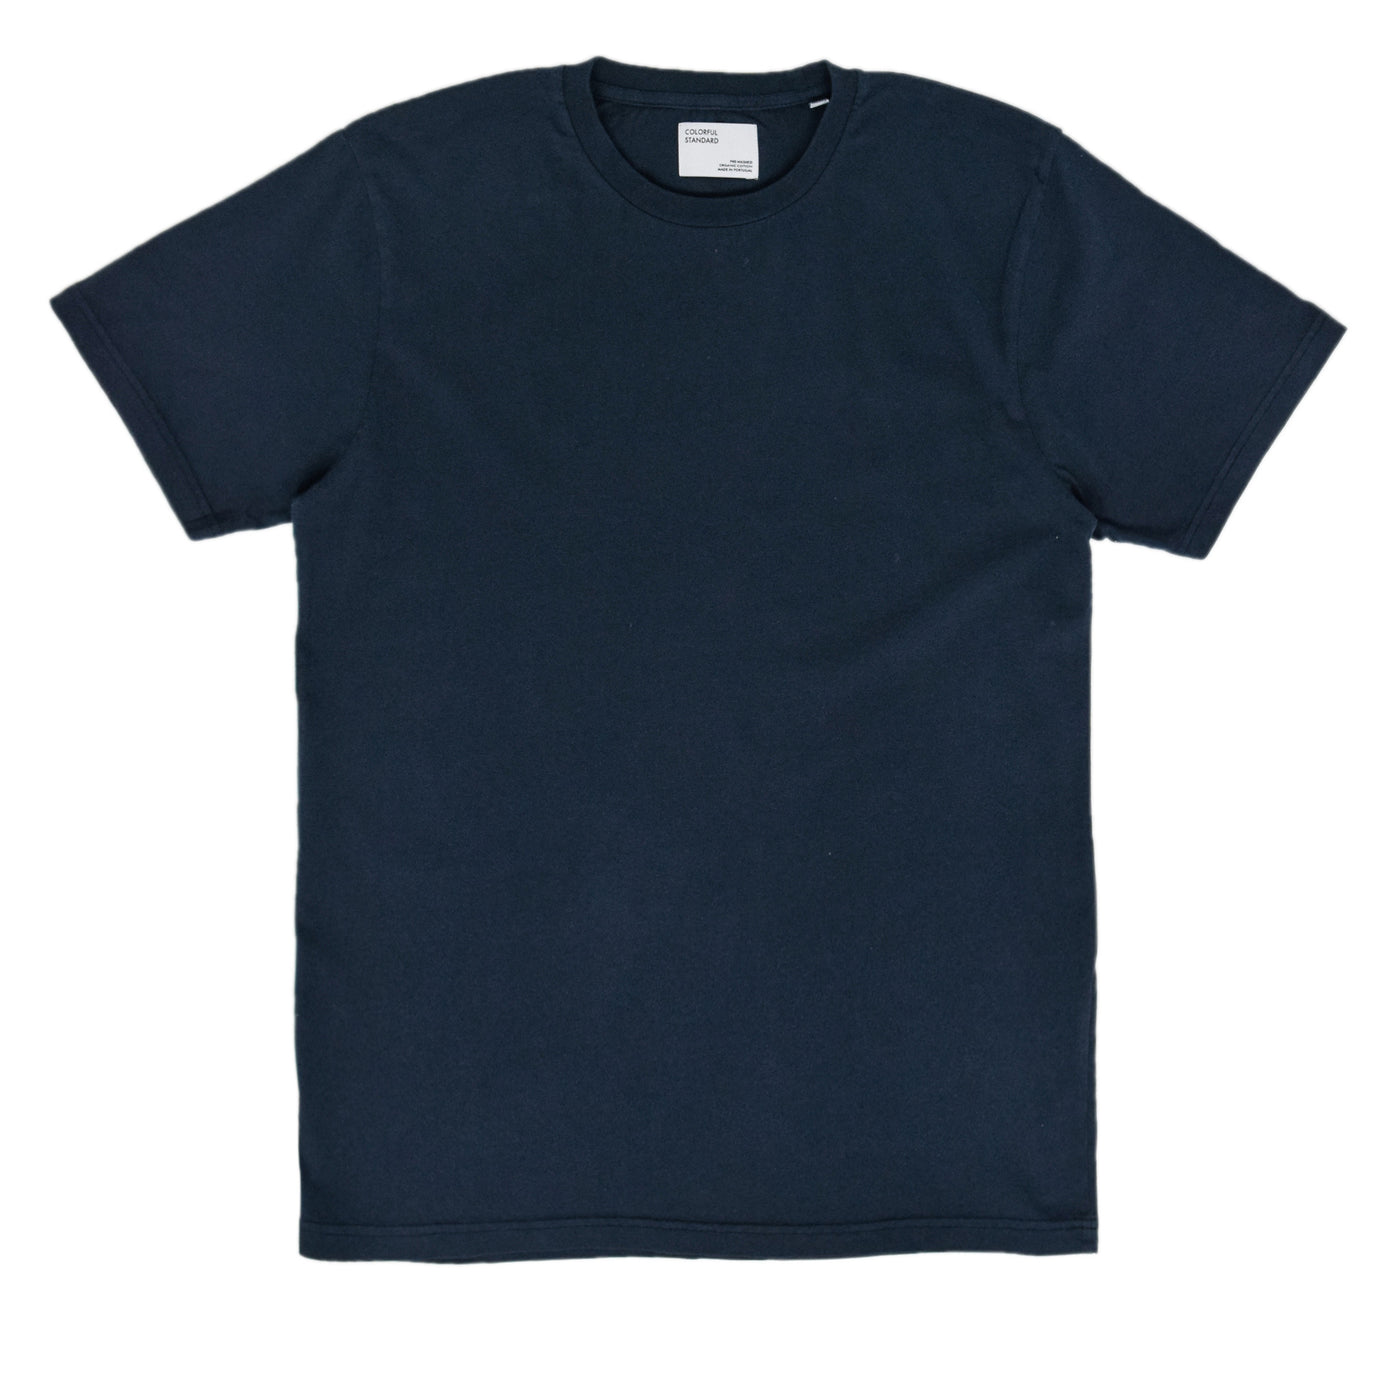 Colorful Standard Organic Cotton Tee Navy Blue front